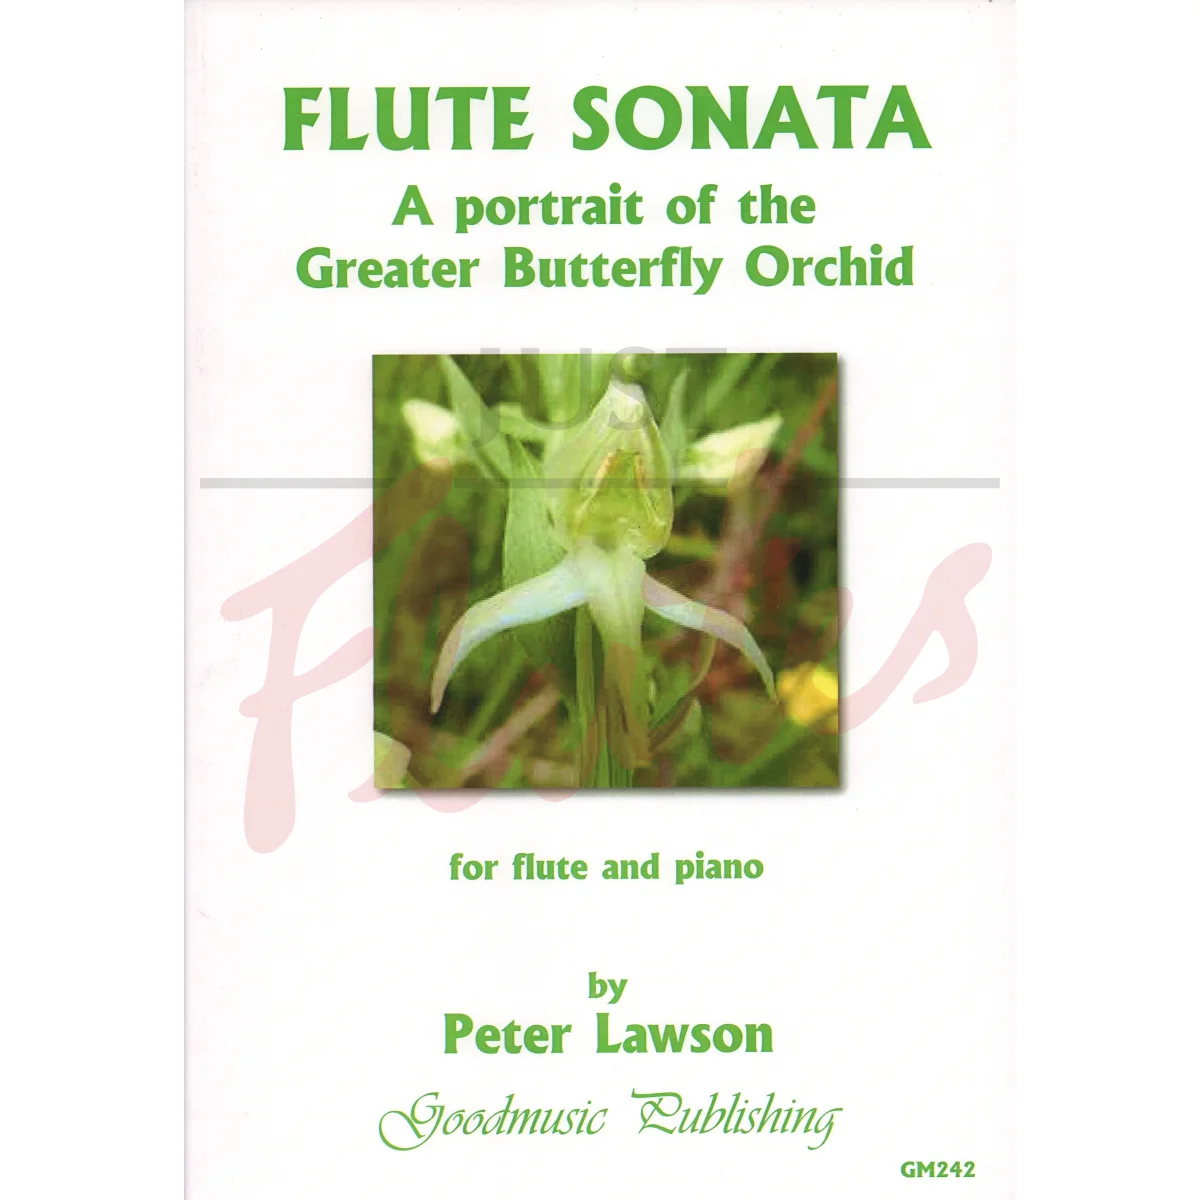 Sonata for Flute and Piano: A Portrait of the Greater Butterfly Orchid